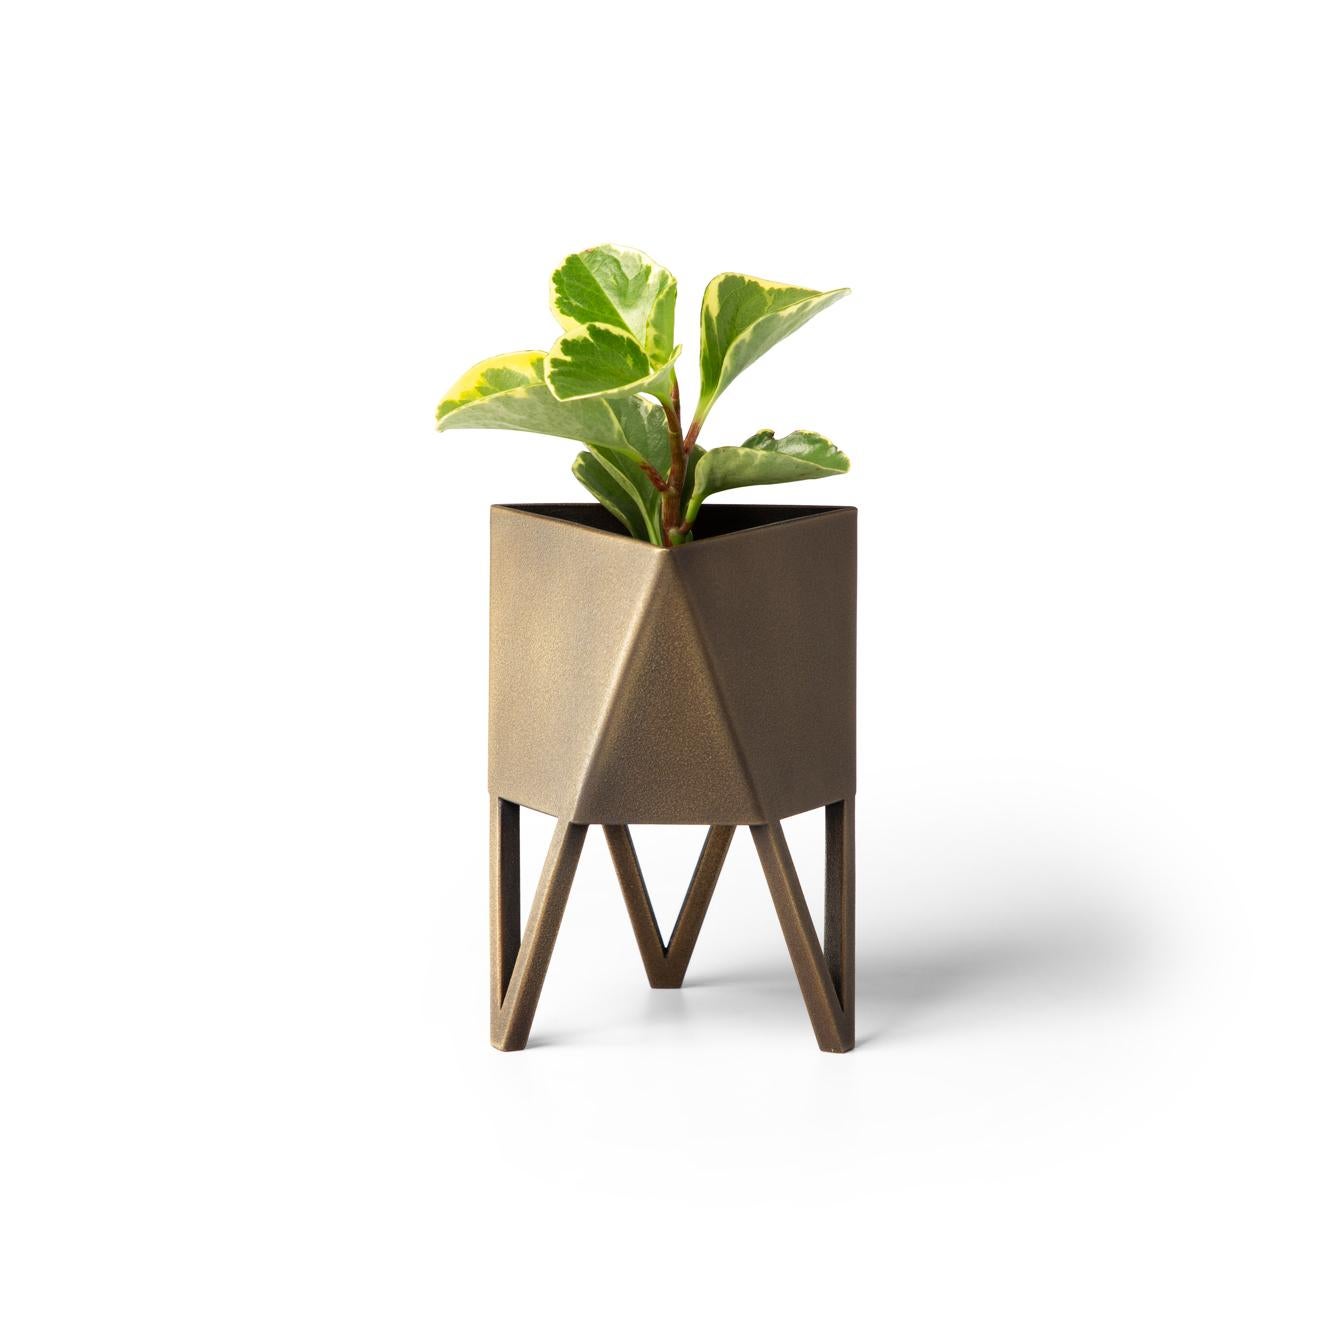 Deca Planter in Mars, Large, by Force/Collide, 2023 8